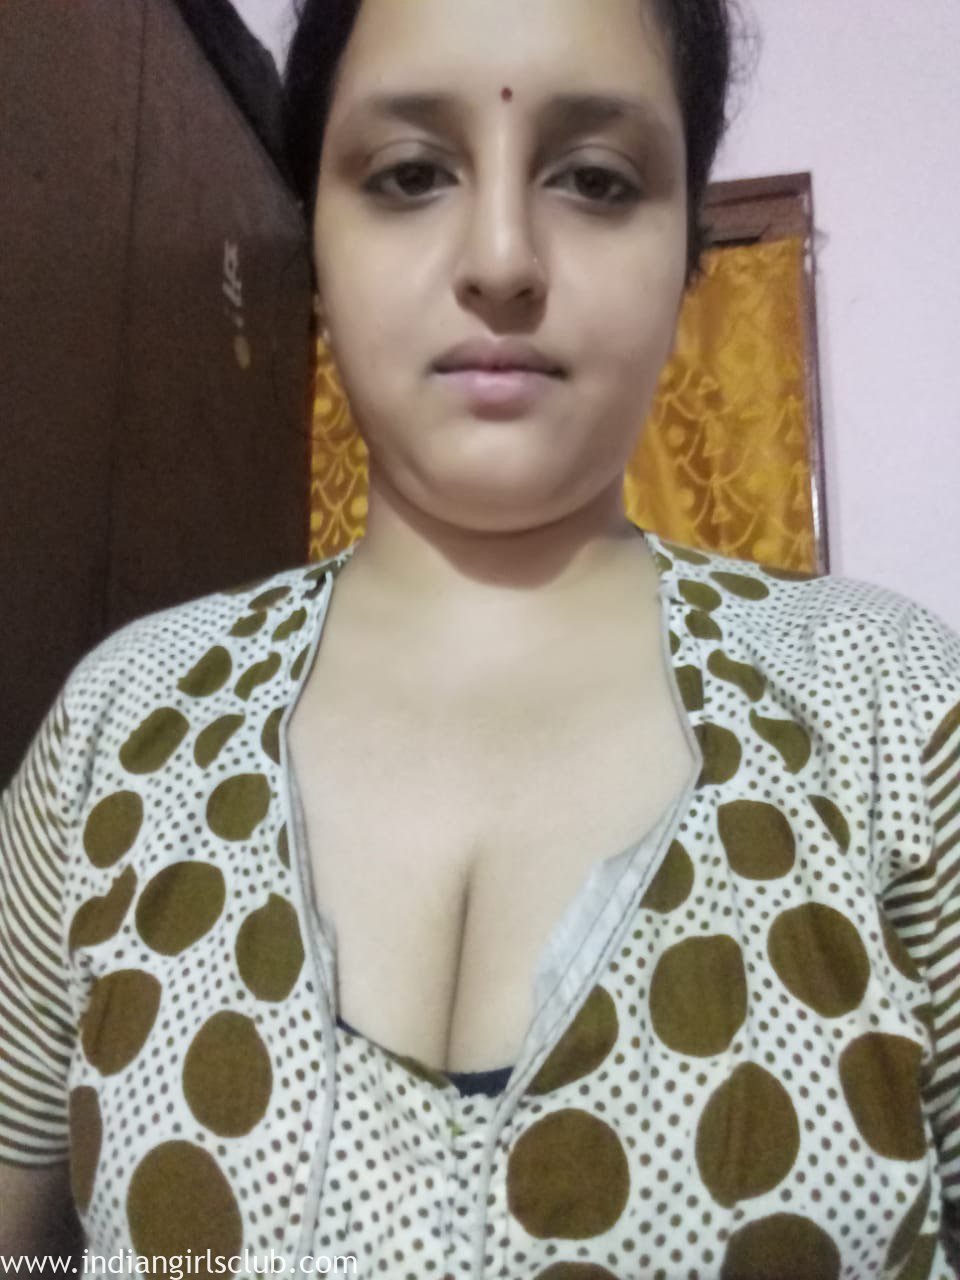 Horny Bengali Indian Housewife Ready For Hot